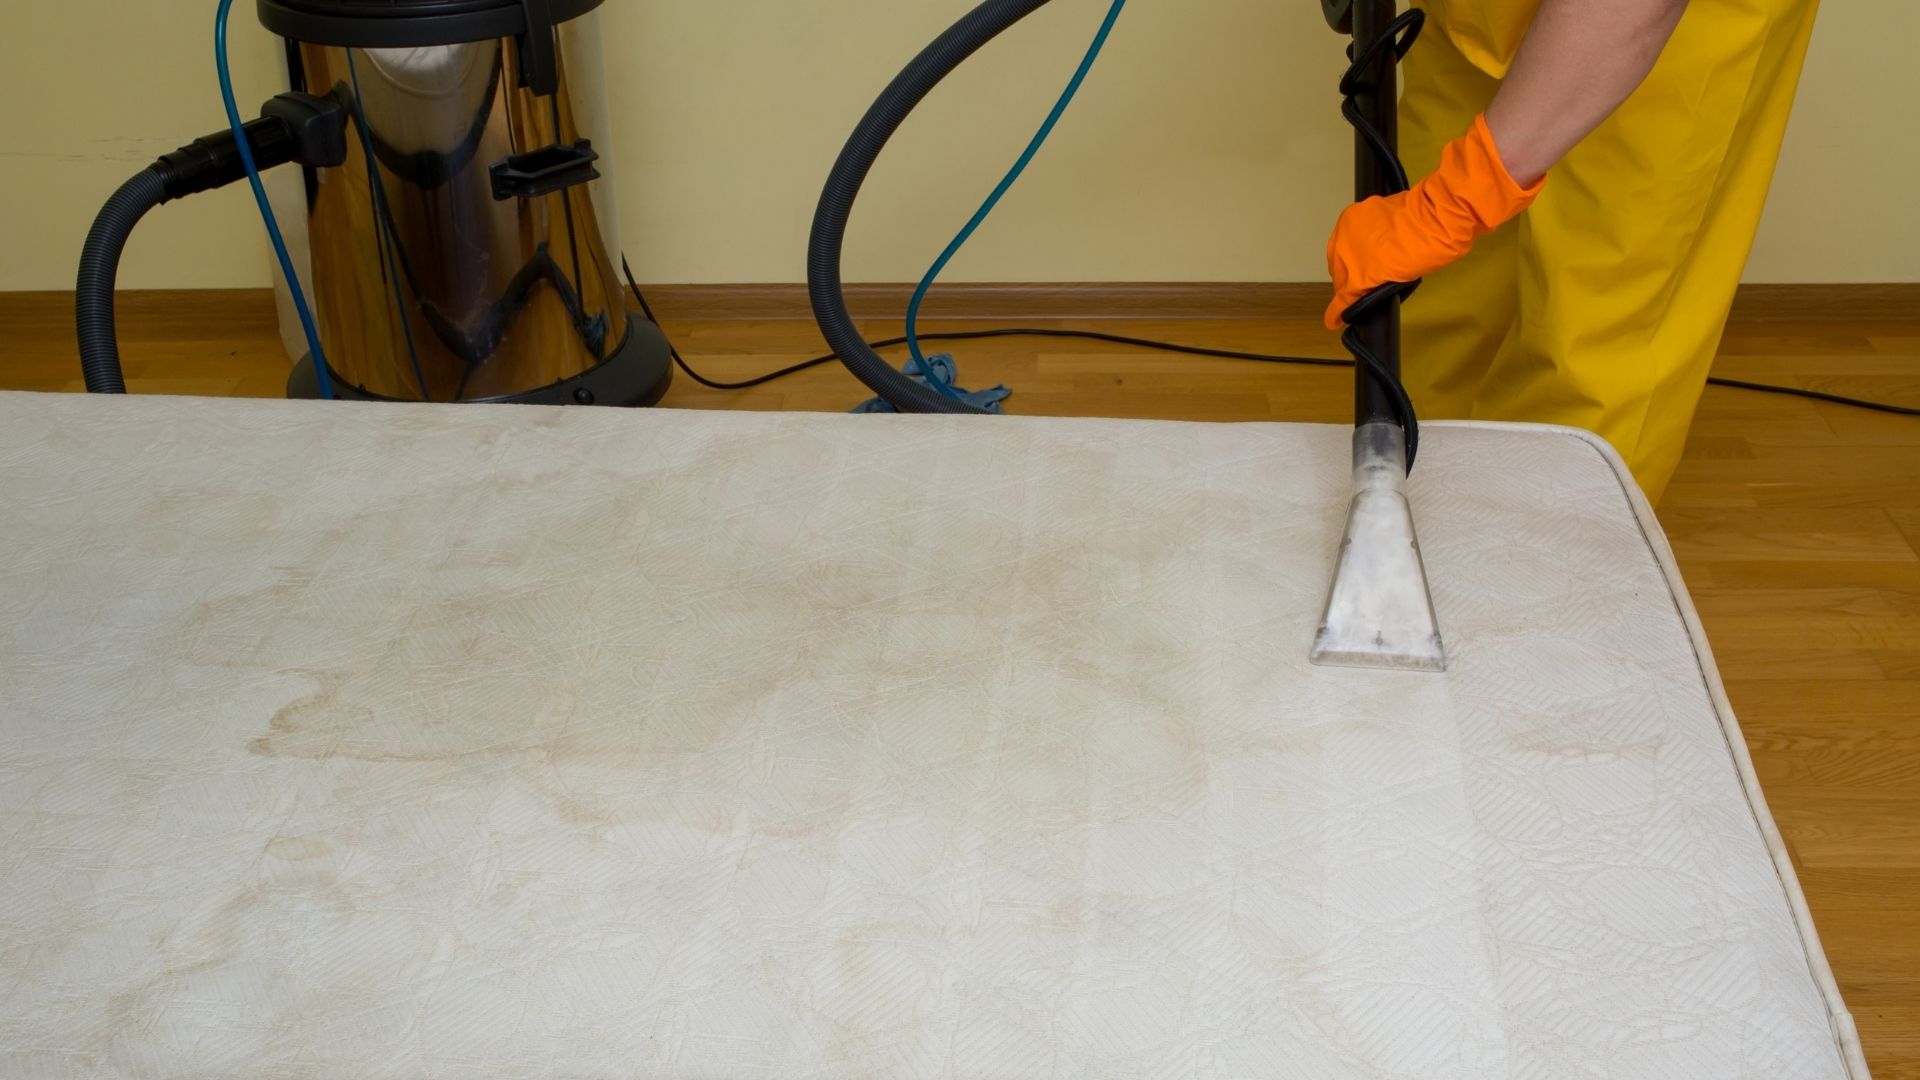 How to Steam Clean a Mattress to Remove Urine, Sweat Stains, Dust